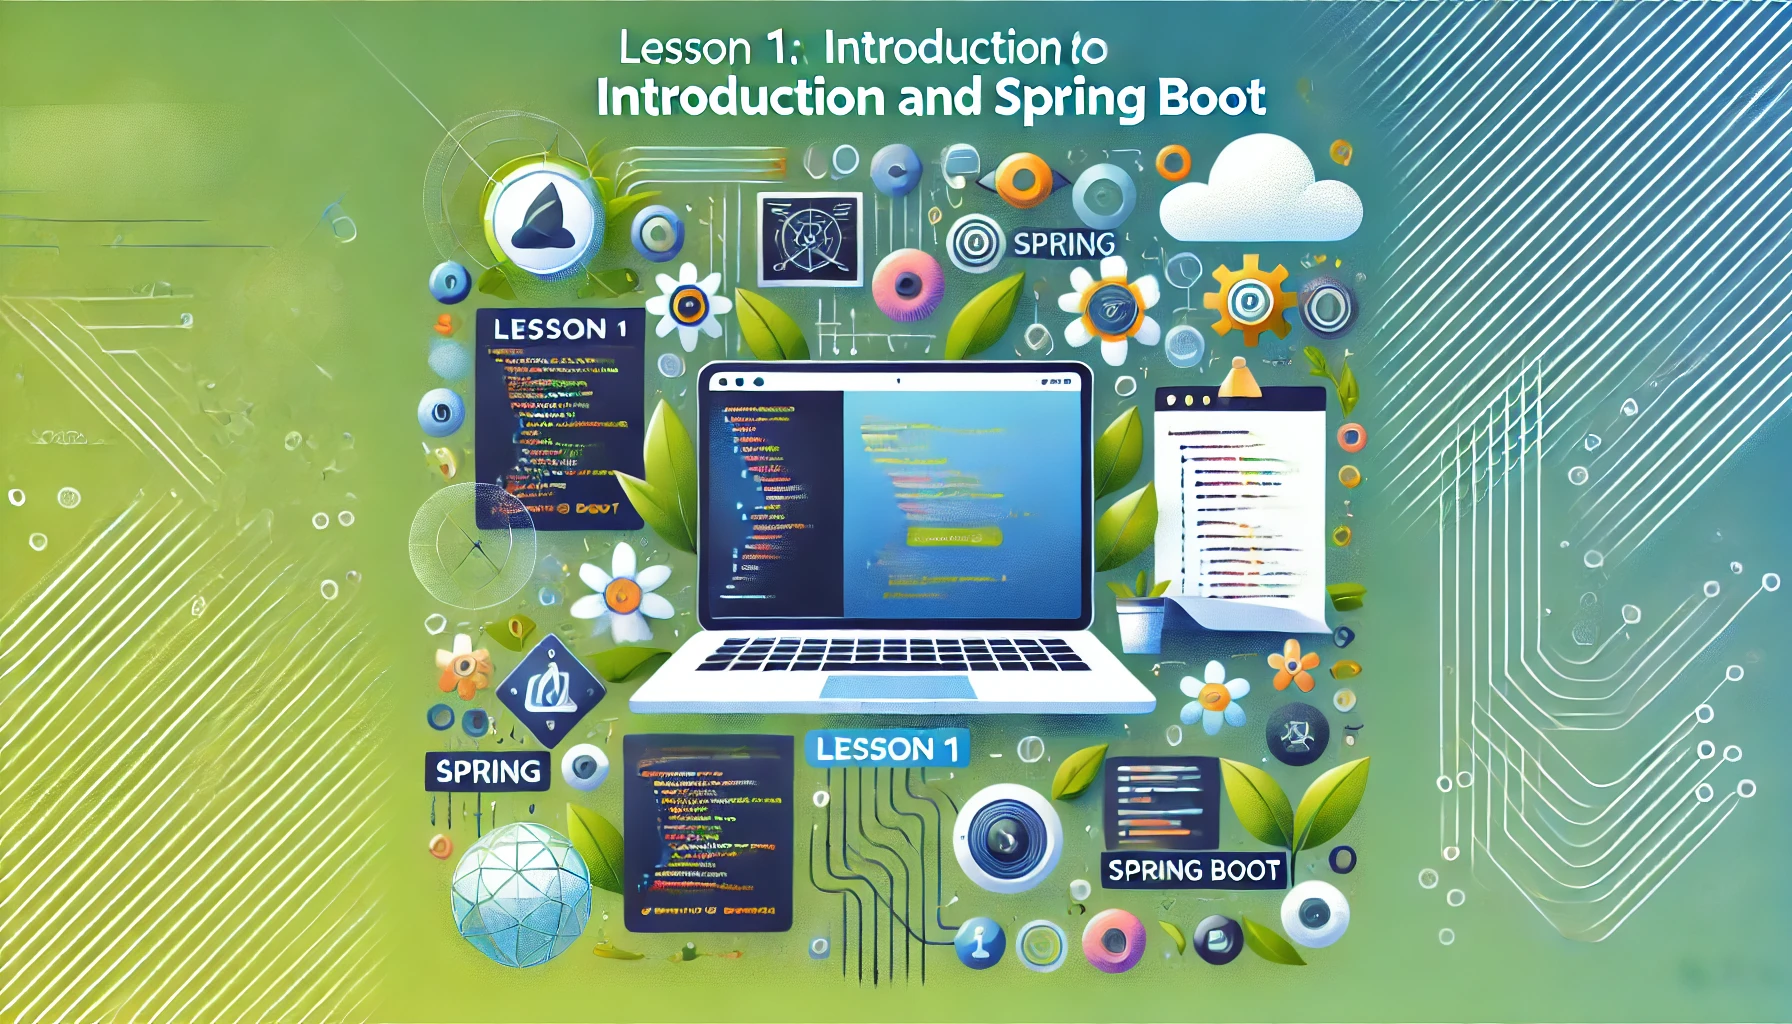 Lesson 1 - Introduction to Spring and Spring Boot